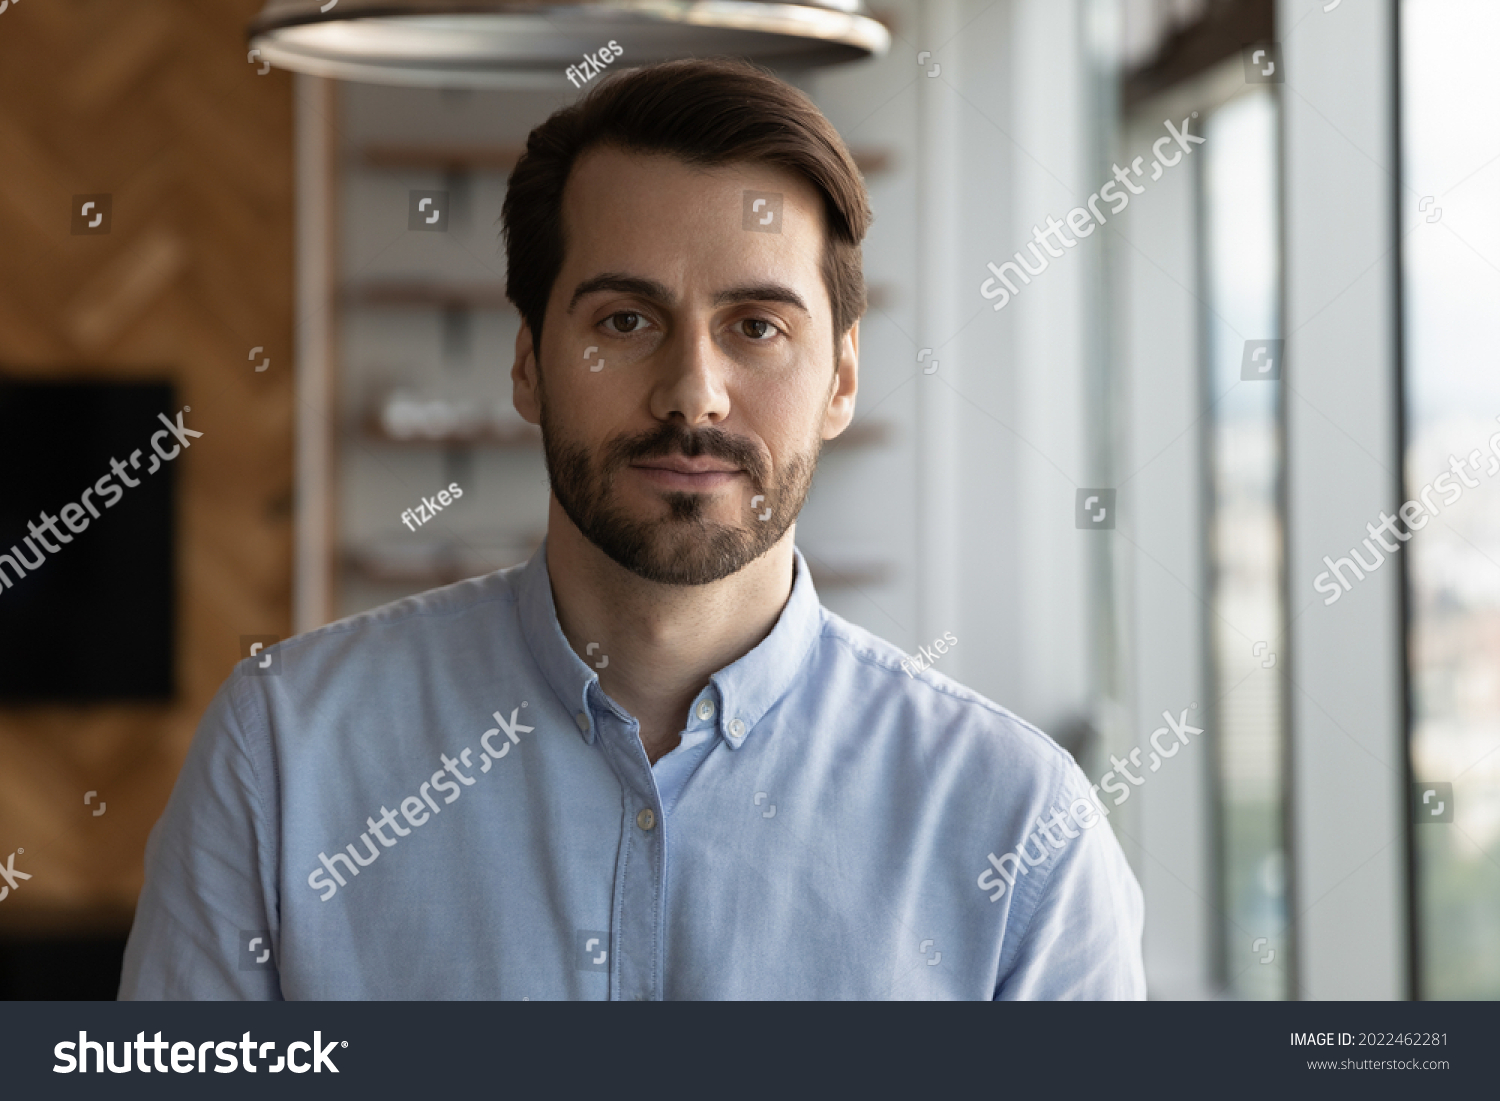 Portrait of serious confident businessman, entrepreneur, company leader, employee. Head shot of millennial 30s bearded man in casual shirt looking at camera. Business profile picture #2022462281